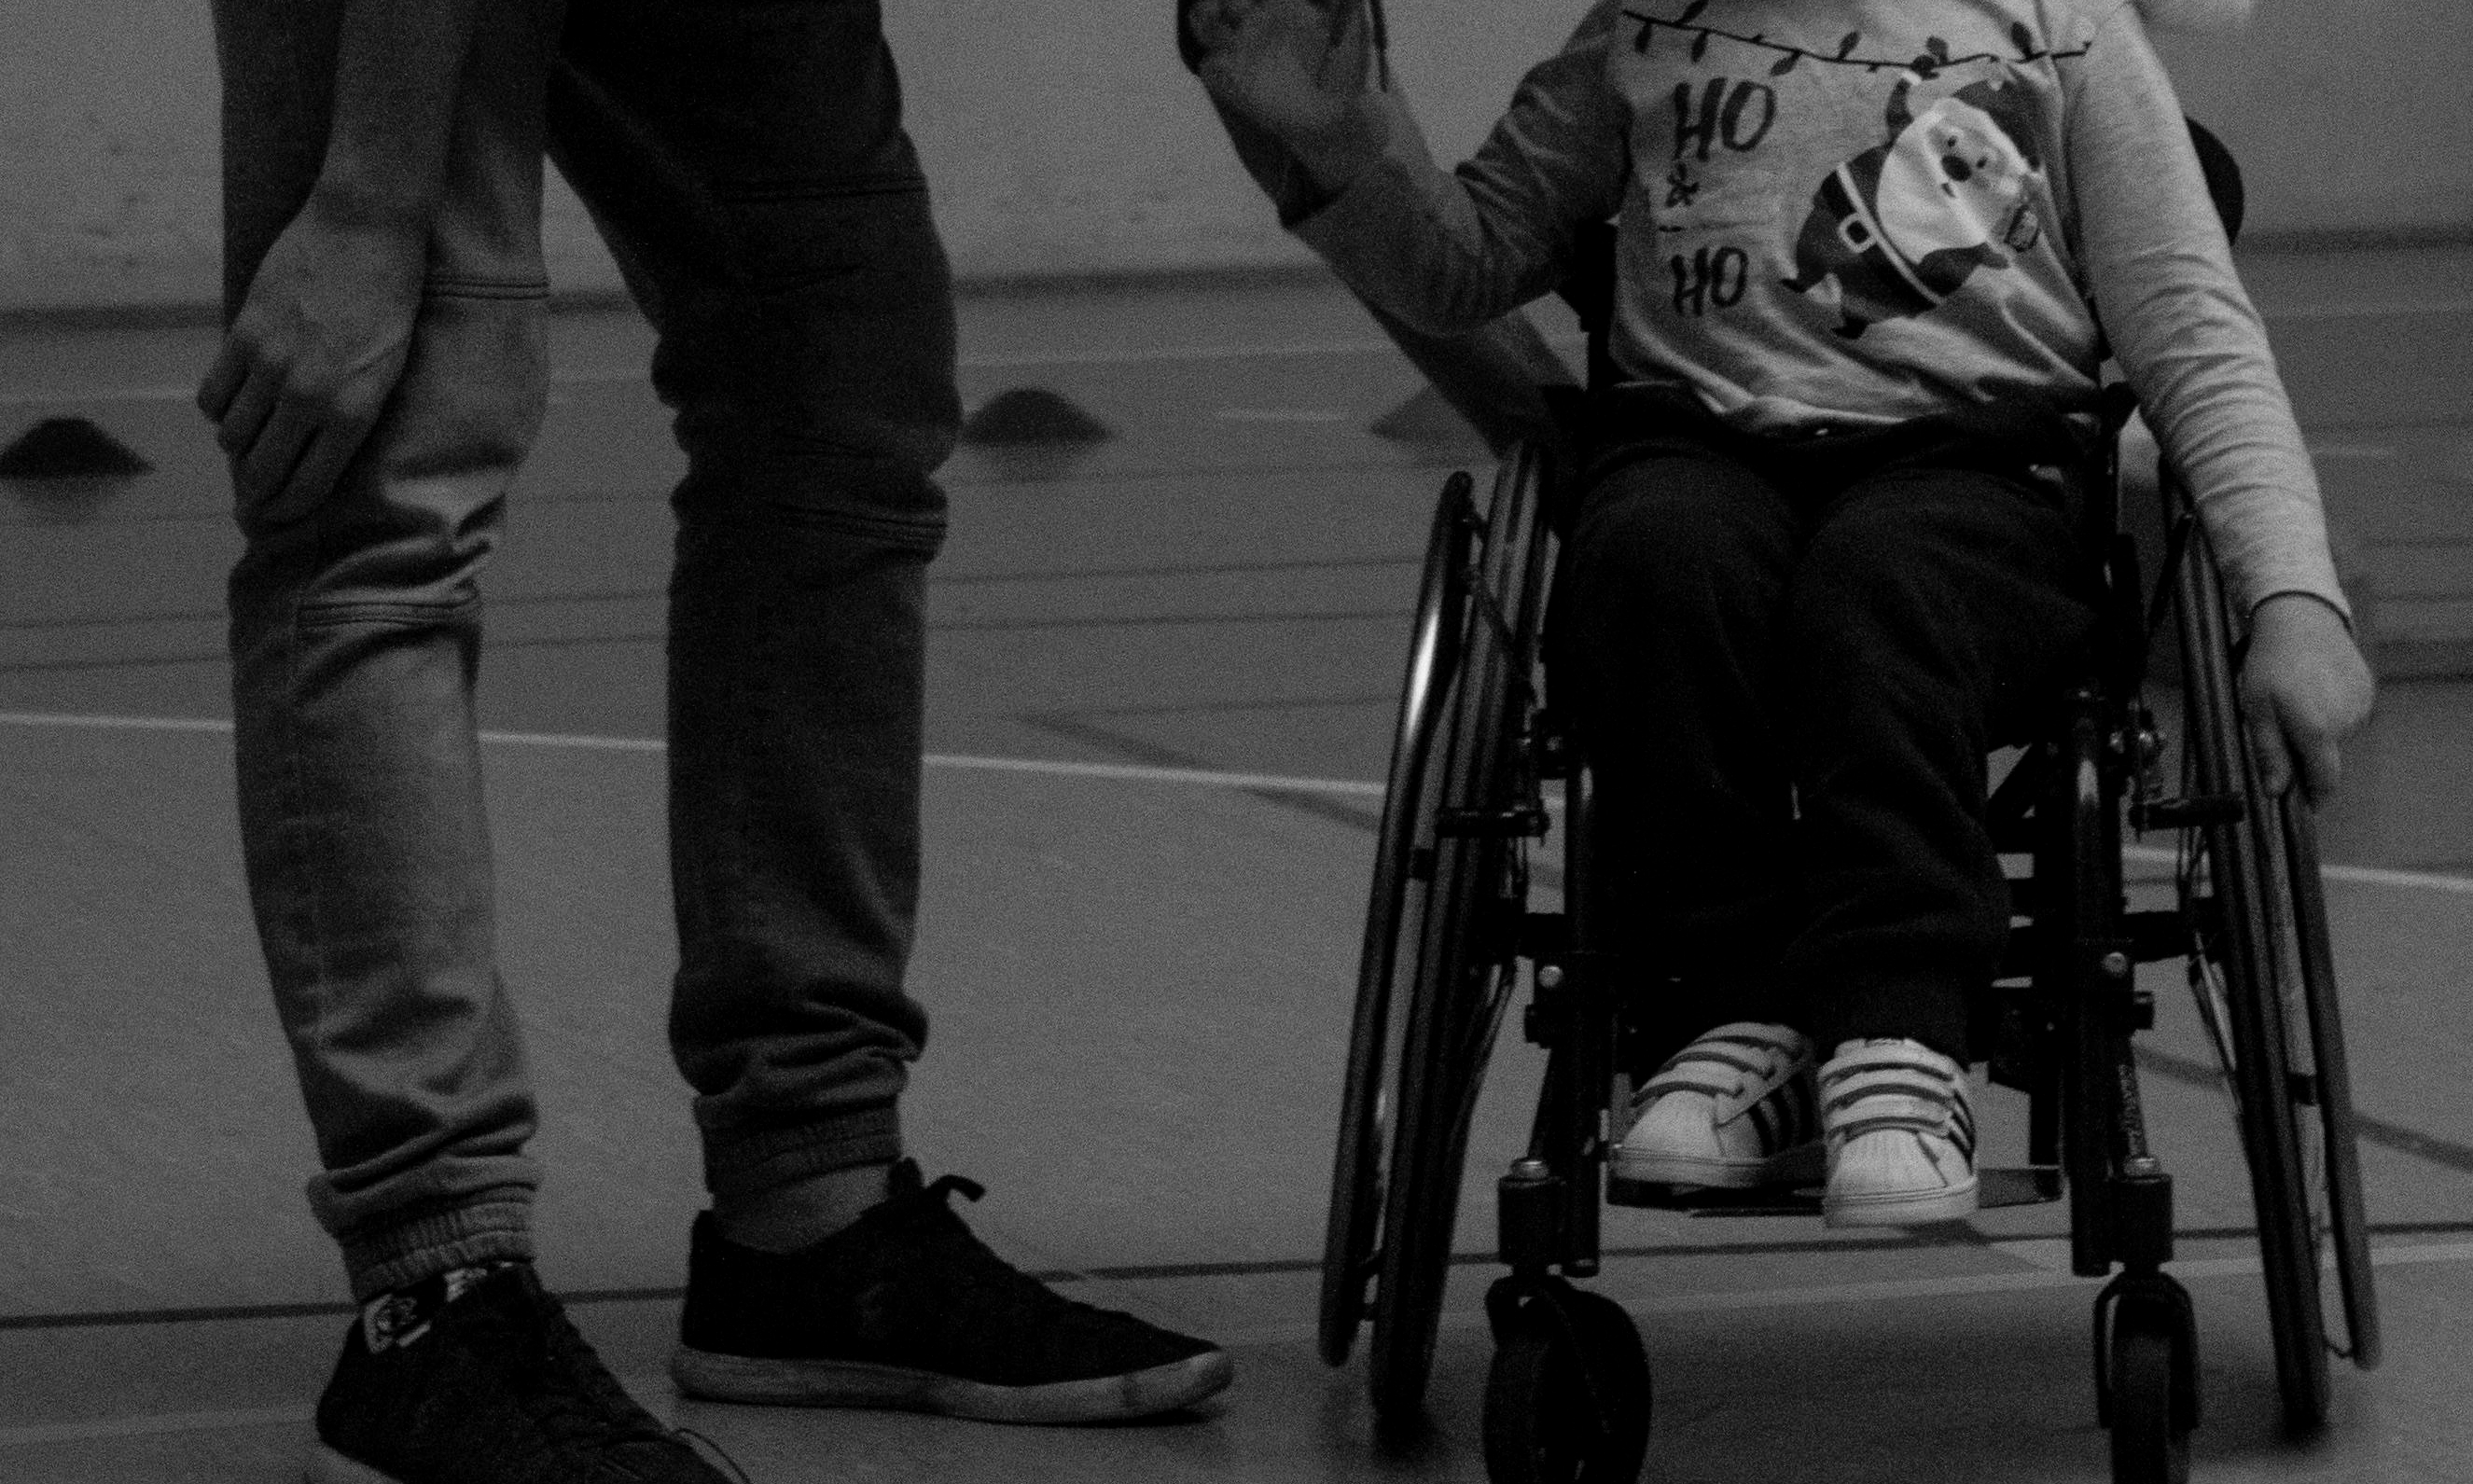 A man bends down to talk to a boy in a wheelchair | Source: Pexels